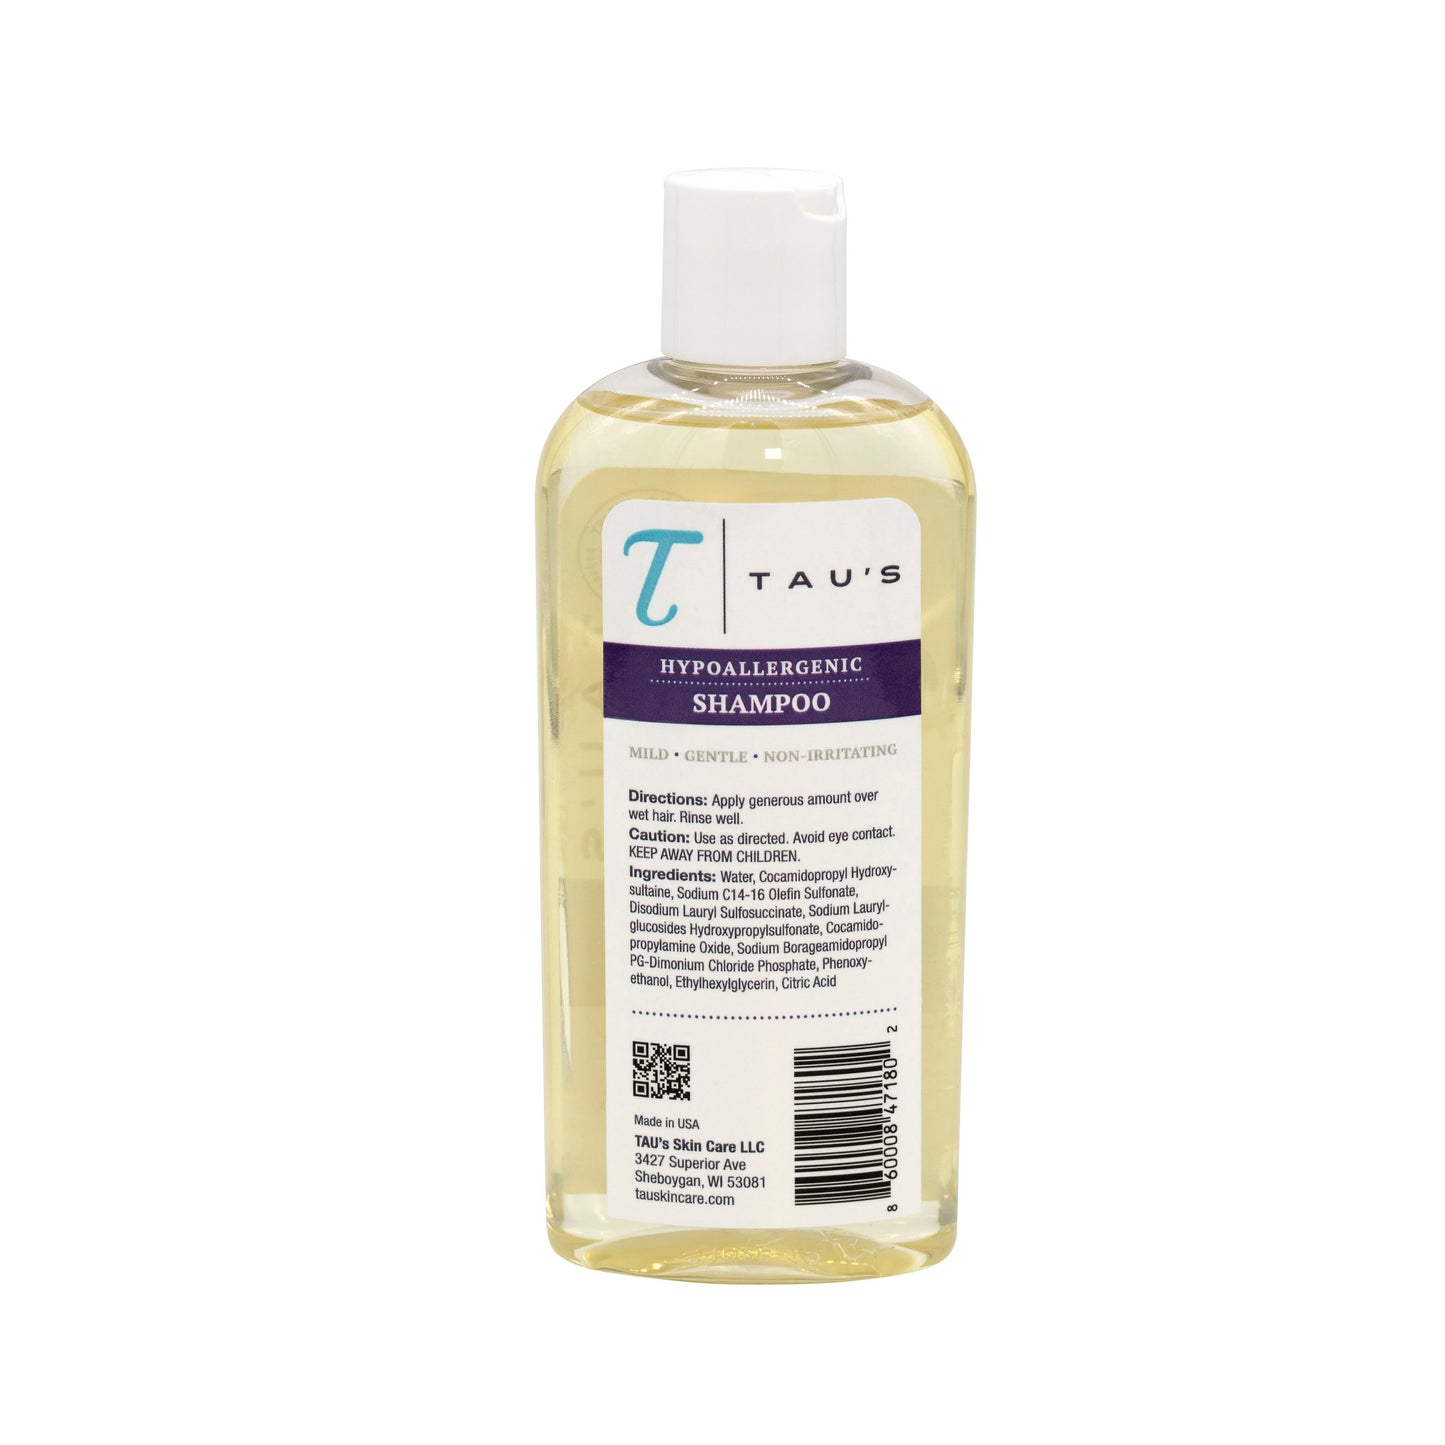 Hypoallergenic Shampoo by Dr. Tau's Skin Care